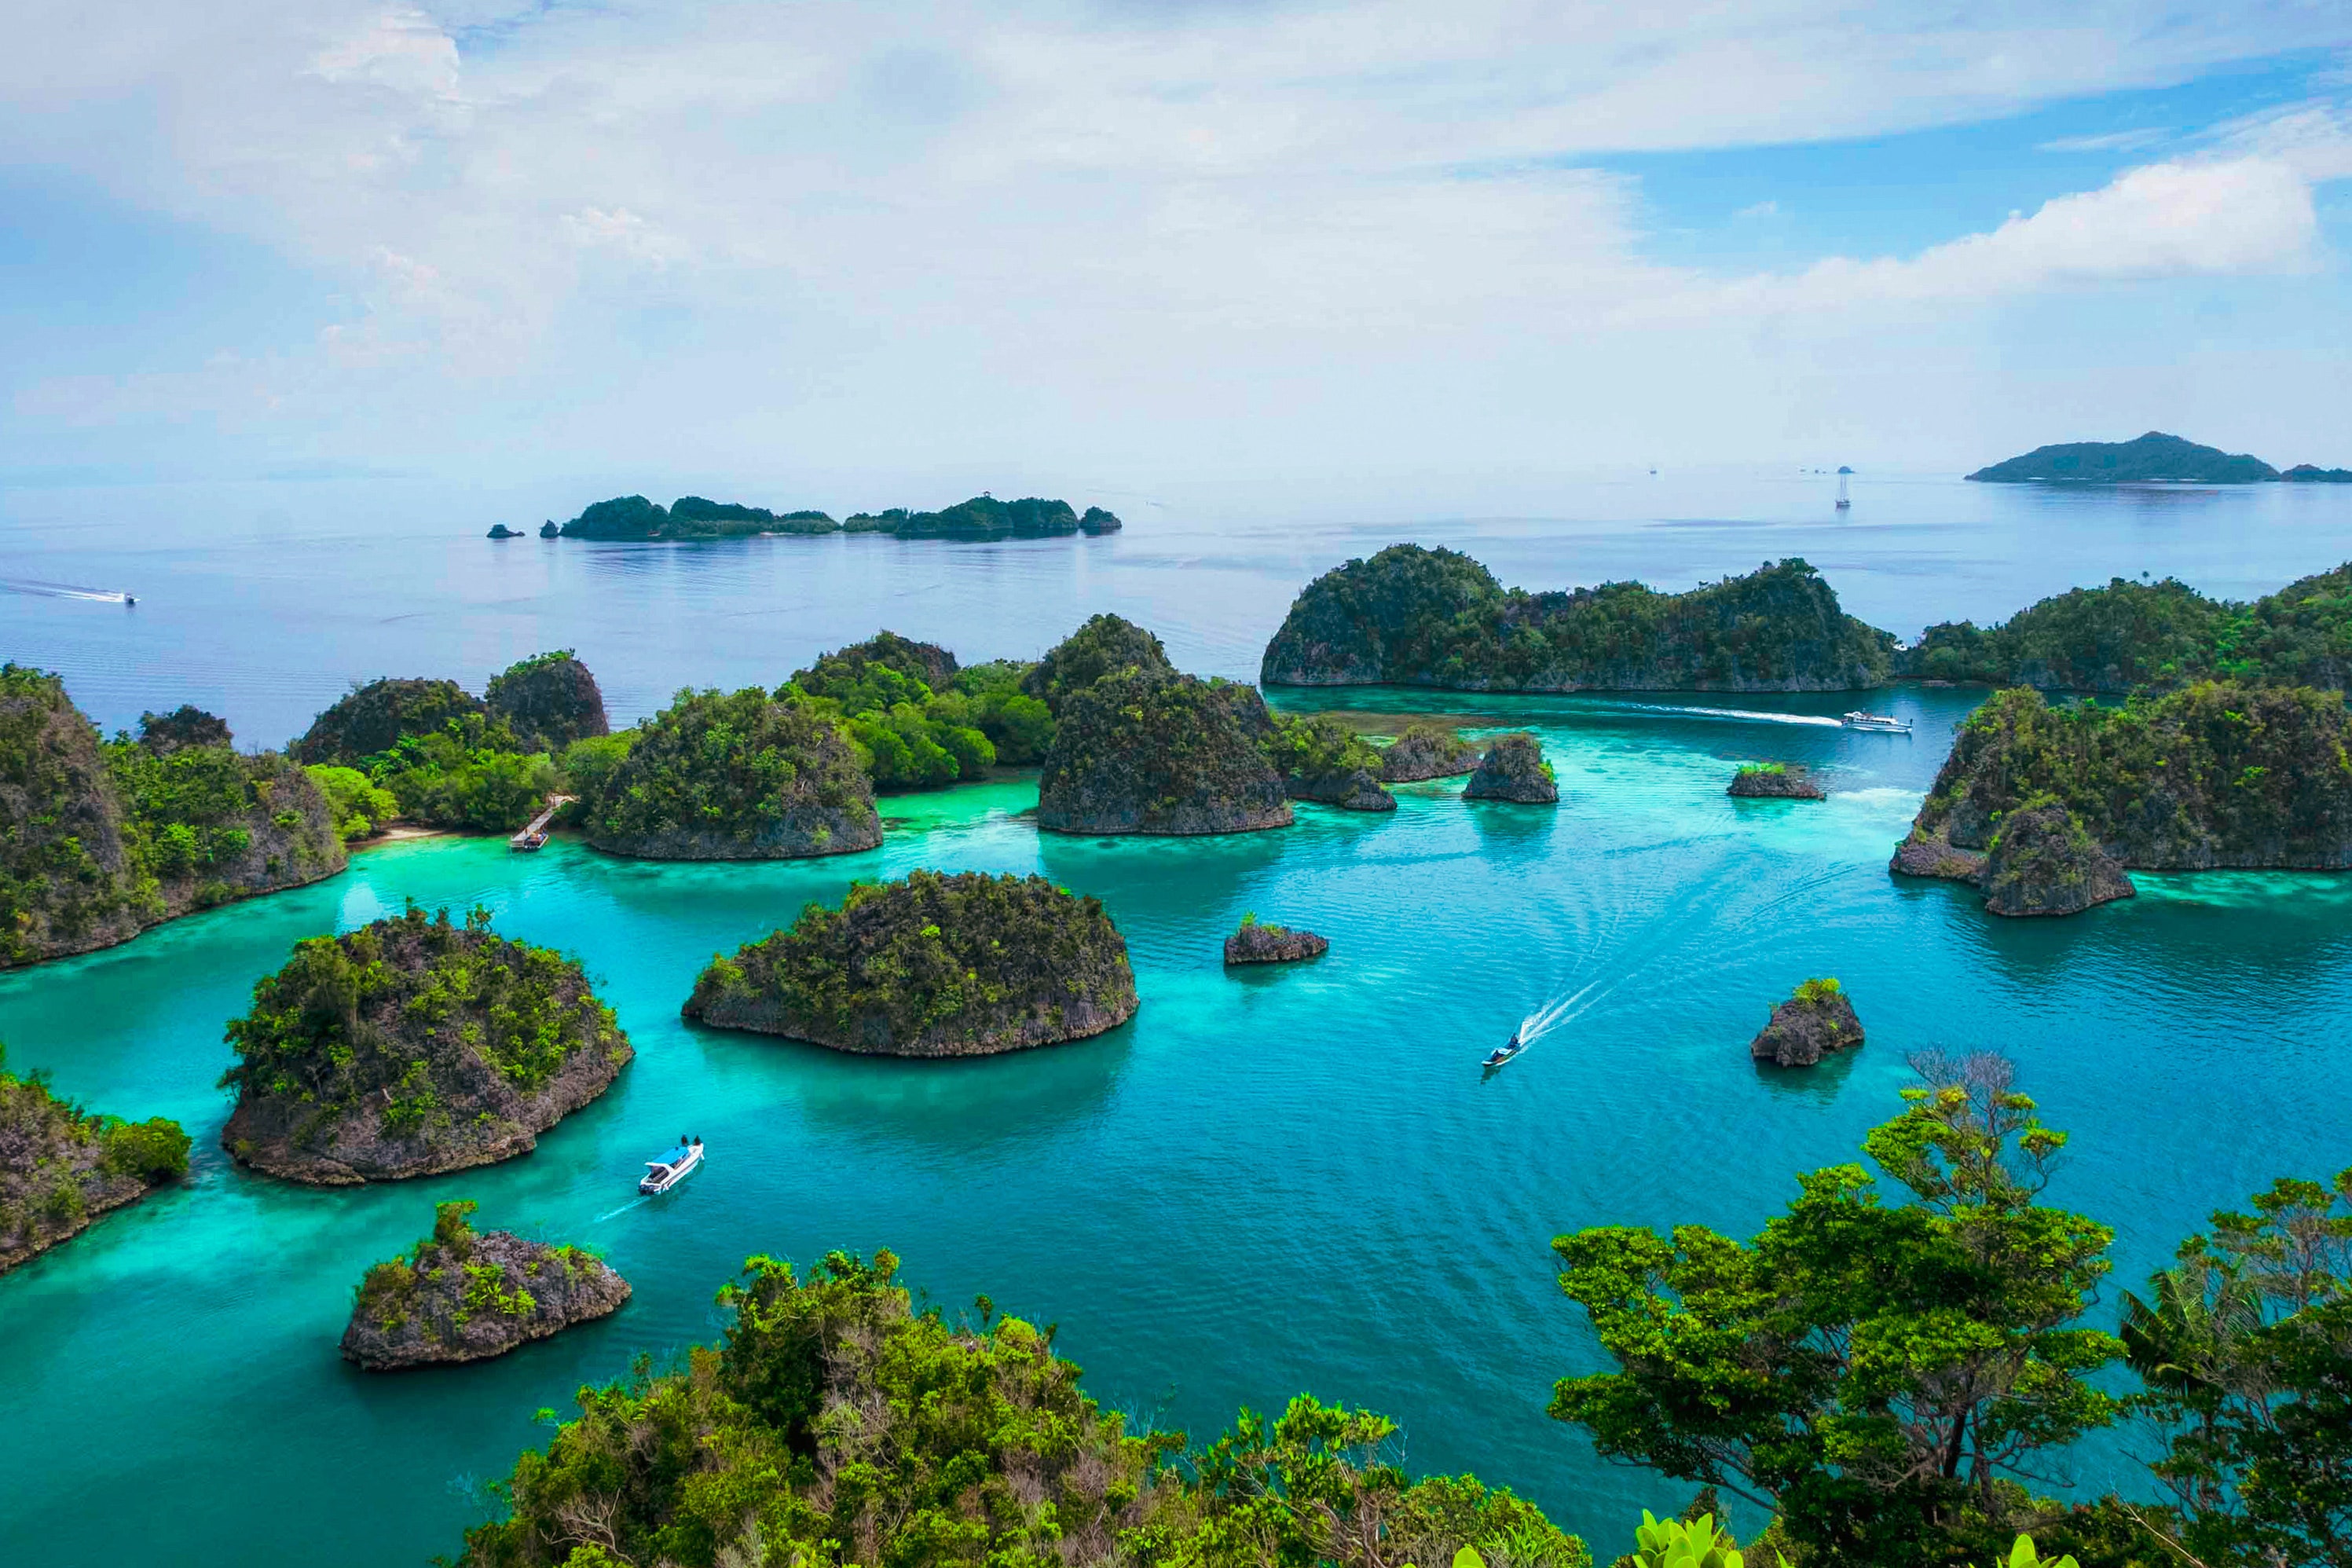 <p>It takes a bit of effort to reach the <a href="https://www.cntraveler.com/stories/2014-05-22/the-remote-beauty-of-raja-ampat?mbid=synd_msn_rss&utm_source=msn&utm_medium=syndication">Raja Ampat Islands</a>—flying first to <a href="https://www.cntraveler.com/stories/2015-05-12/5-things-you-must-do-in-jakarta?mbid=synd_msn_rss&utm_source=msn&utm_medium=syndication">Jakarta</a>, then to Sorong, where most travelers hop on a liveaboard. But once you arrive, you’ll be greeted by lush jungles, blue channels, and biodiverse reefs. The archipelago is truly a scuba diver’s dream, where an average dive gets you up close to manta rays, hawksbill turtles, and around 1,300 species of colorful coral-dwelling fish. There’s really no bad time to visit, but March typically yields the best diving weather (think less rain and calmer waters).</p> <p>The most popular way to explore Raja Ampat is by booking a small cruise or yacht, and you have several great options to choose from. You could try Aqua Expeditions and set sail on the long-range cruising yacht, <em>Aqua Blu</em>, which offers seven-night, <a href="https://www.aquaexpeditions.com/indonesia-cruise/raja-ampat">island-hopping itineraries</a>. The boat has 15 sea-facing suites and a spa, and guests can partake in activities like snorkeling, kayaking, diving to manta ray cleaning stations, and searching for elusive bird of paradise species on guided hikes.</p><p>Sign up to receive the latest news, expert tips, and inspiration on all things travel</p><a href="https://www.cntraveler.com/newsletter/the-daily?sourceCode=msnsend">Inspire Me</a>